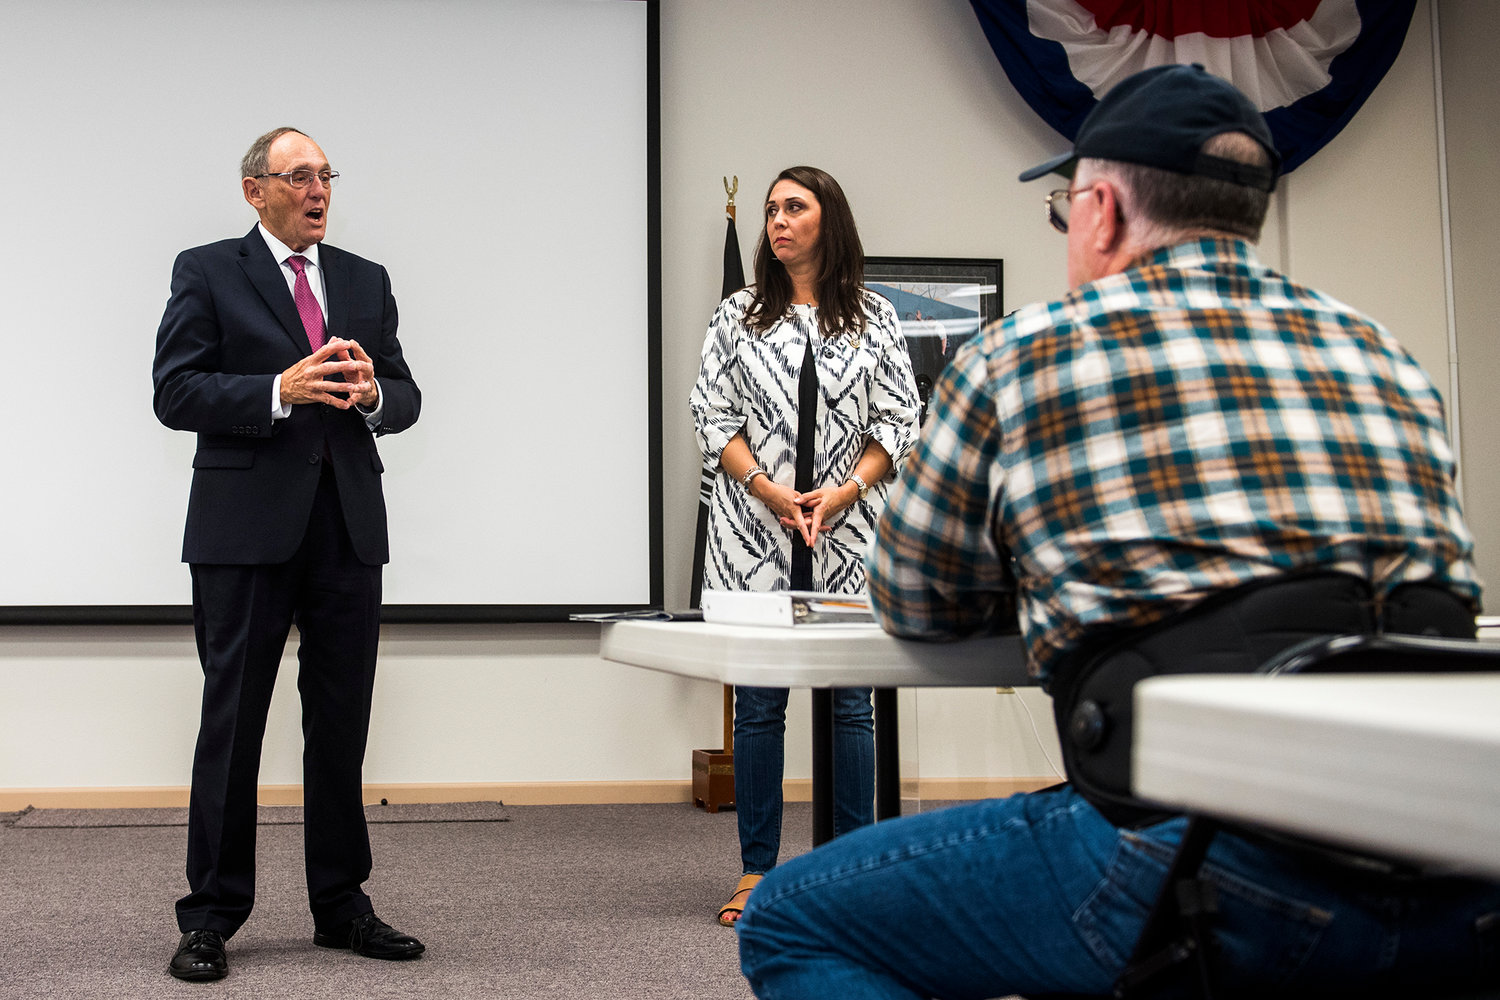 Rep. Phil Roe, left, of Tennessee, and Rep. Jaime Herrera Beutler, center, talk to veterans during a public meeting Monday afternoon at the Chehalis Veterans Memorial Museum.